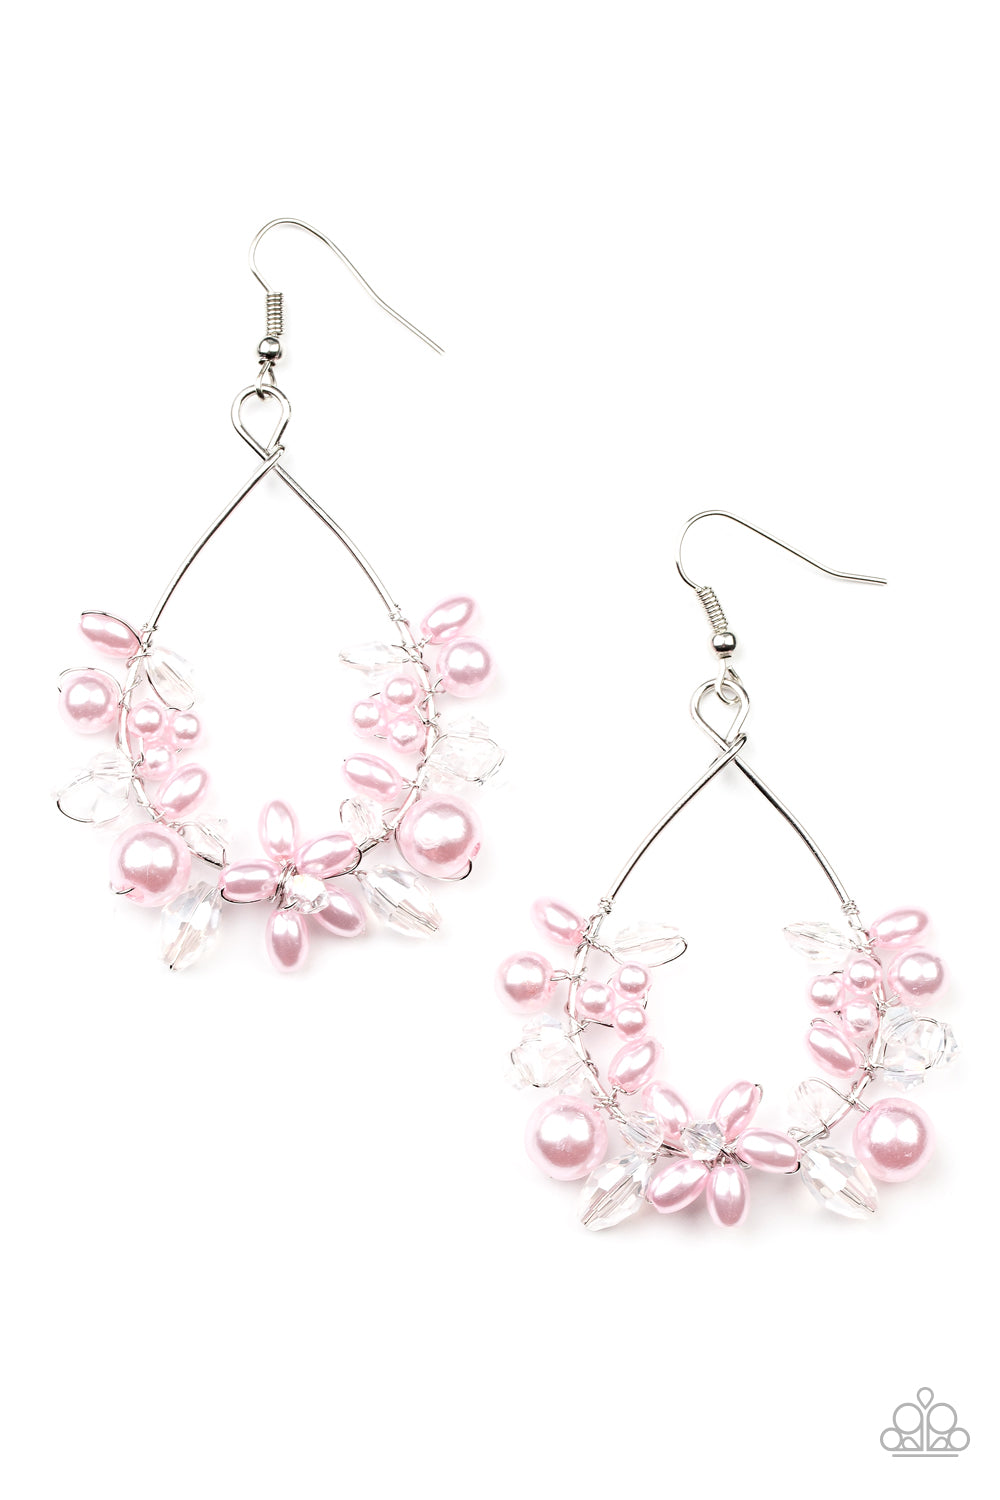 Marina Banquet Pink Earring - Paparazzi Accessories  A bubbly collection of pink pearls and white crystal-like beads are threaded along the bottom of a dainty wire hoop, creating twinkly floral accents. Earring attaches to a standard fishhook fitting.  Sold as one pair of earrings.